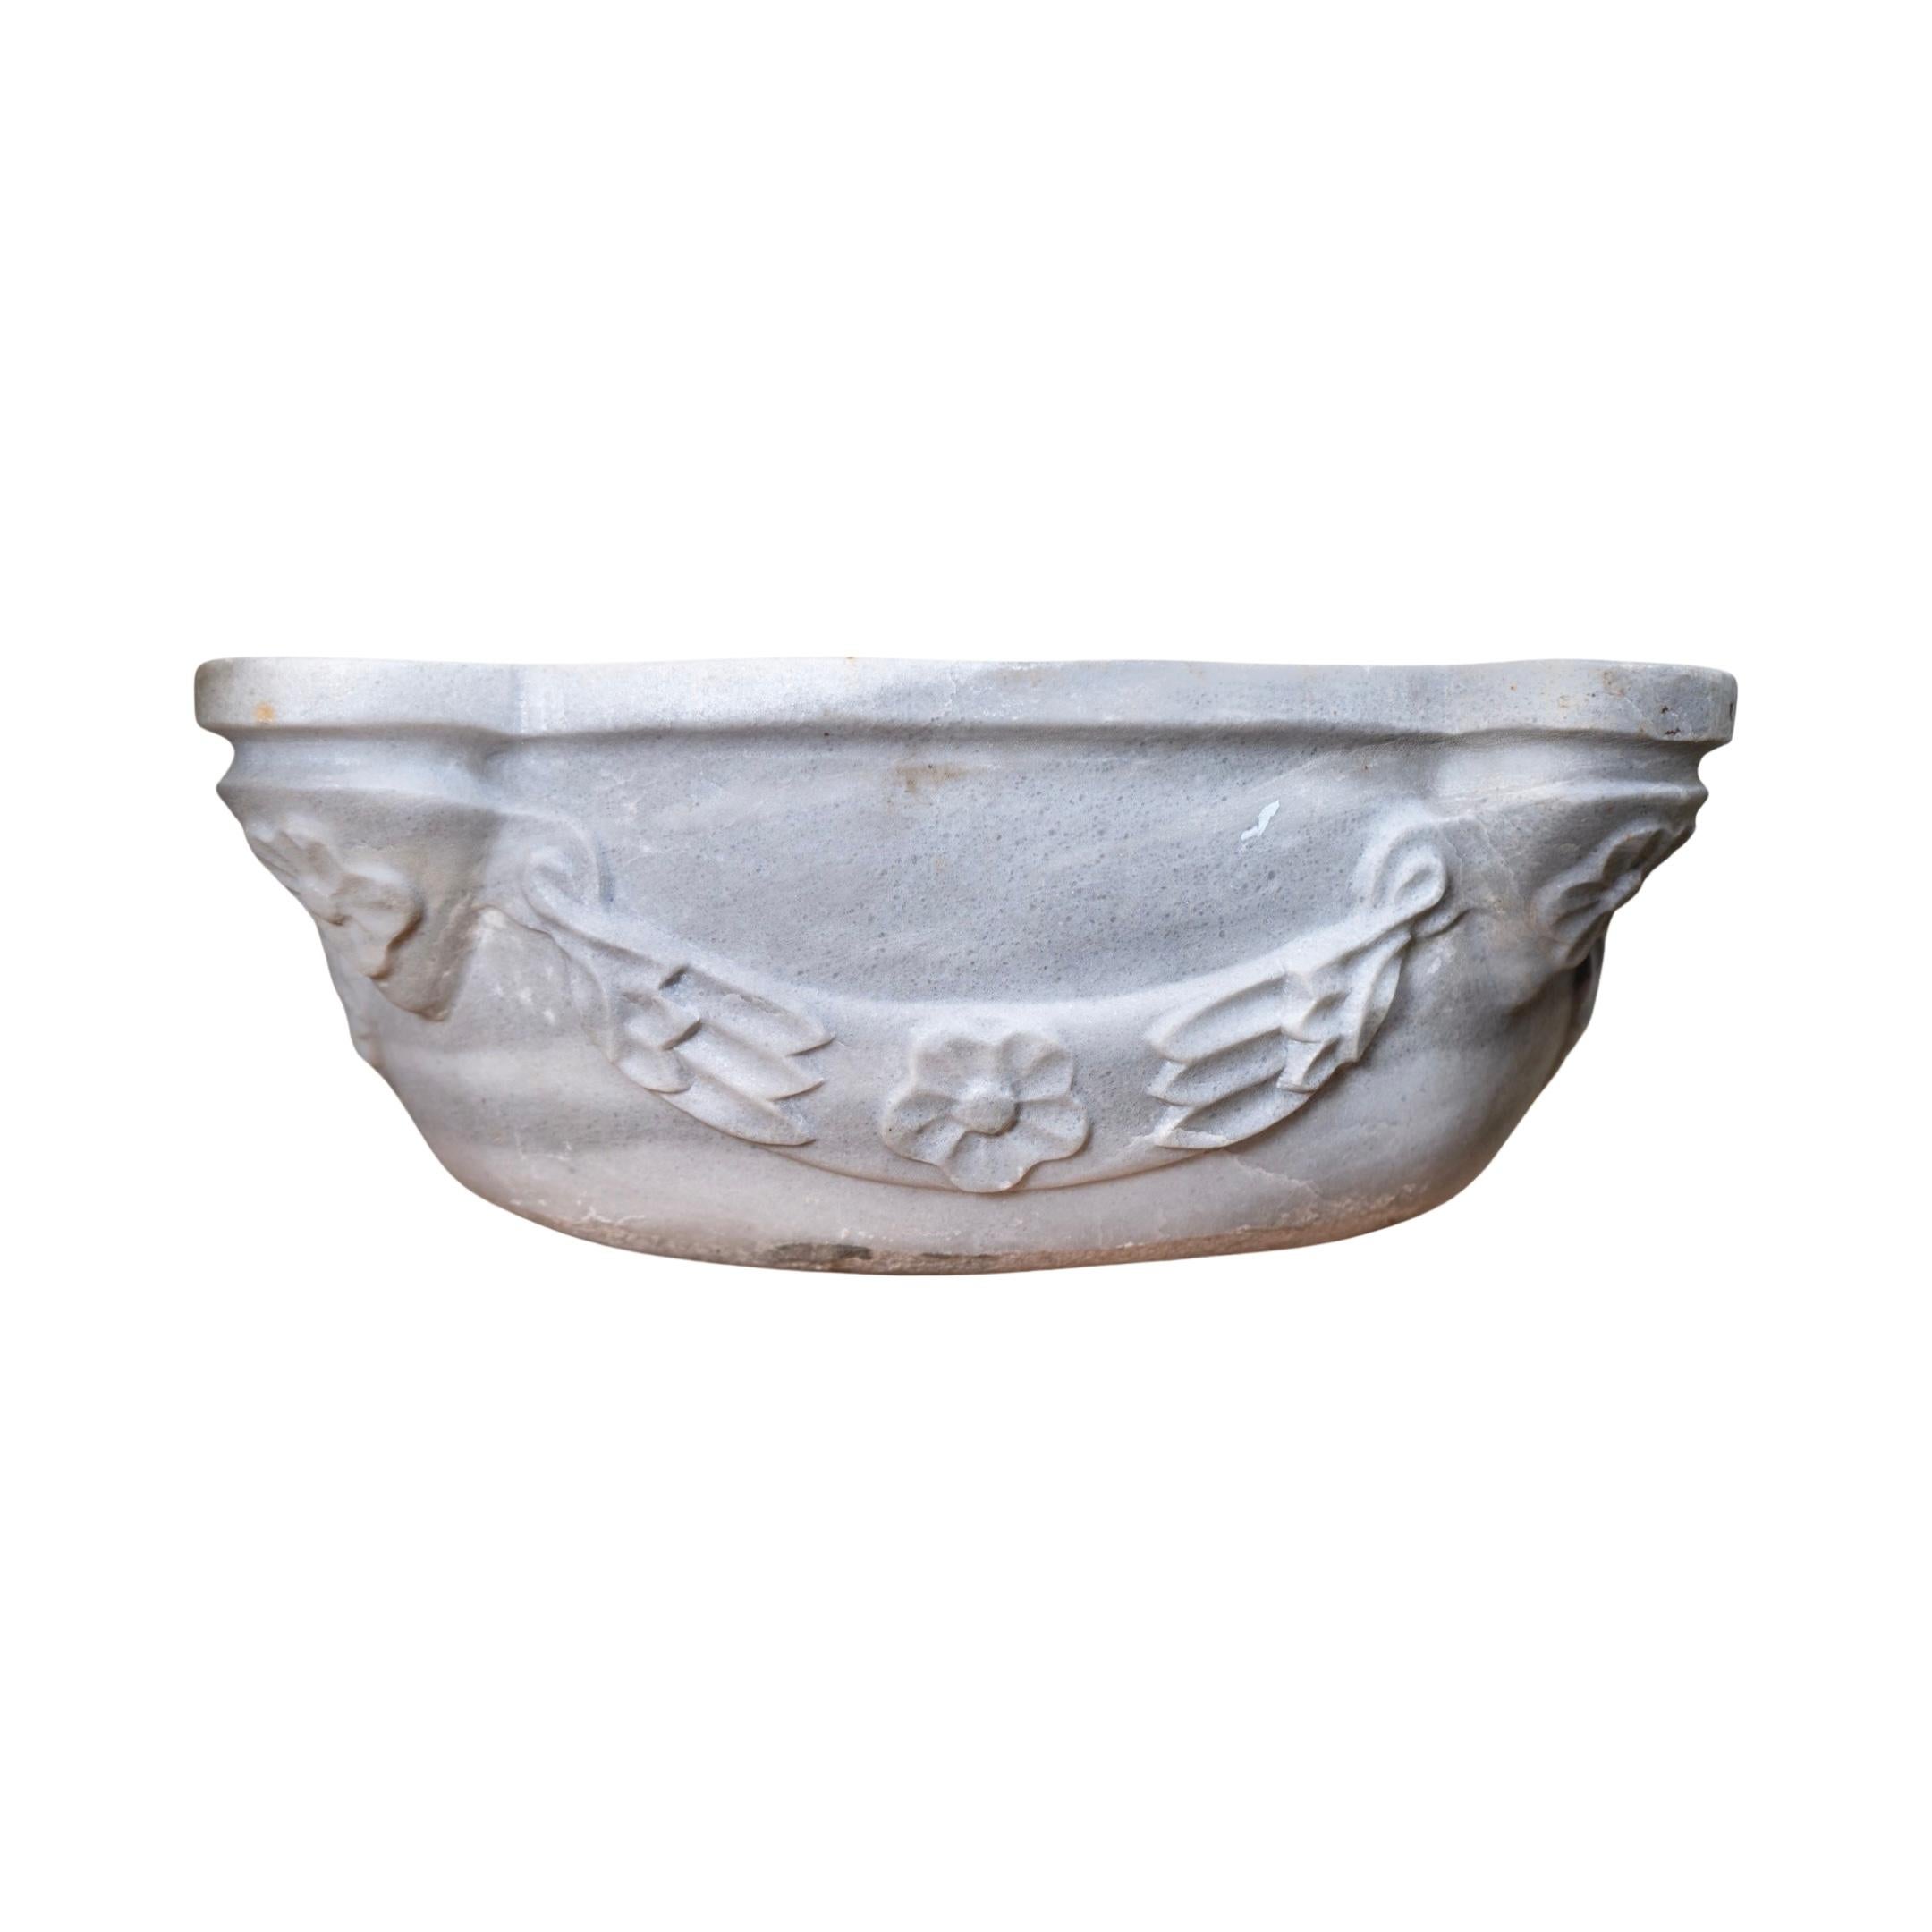 This premium French White Marble Sink crafted from the 1800s exudes timeless magnificence and durability, serving as an exceptional focal point for any bathroom.